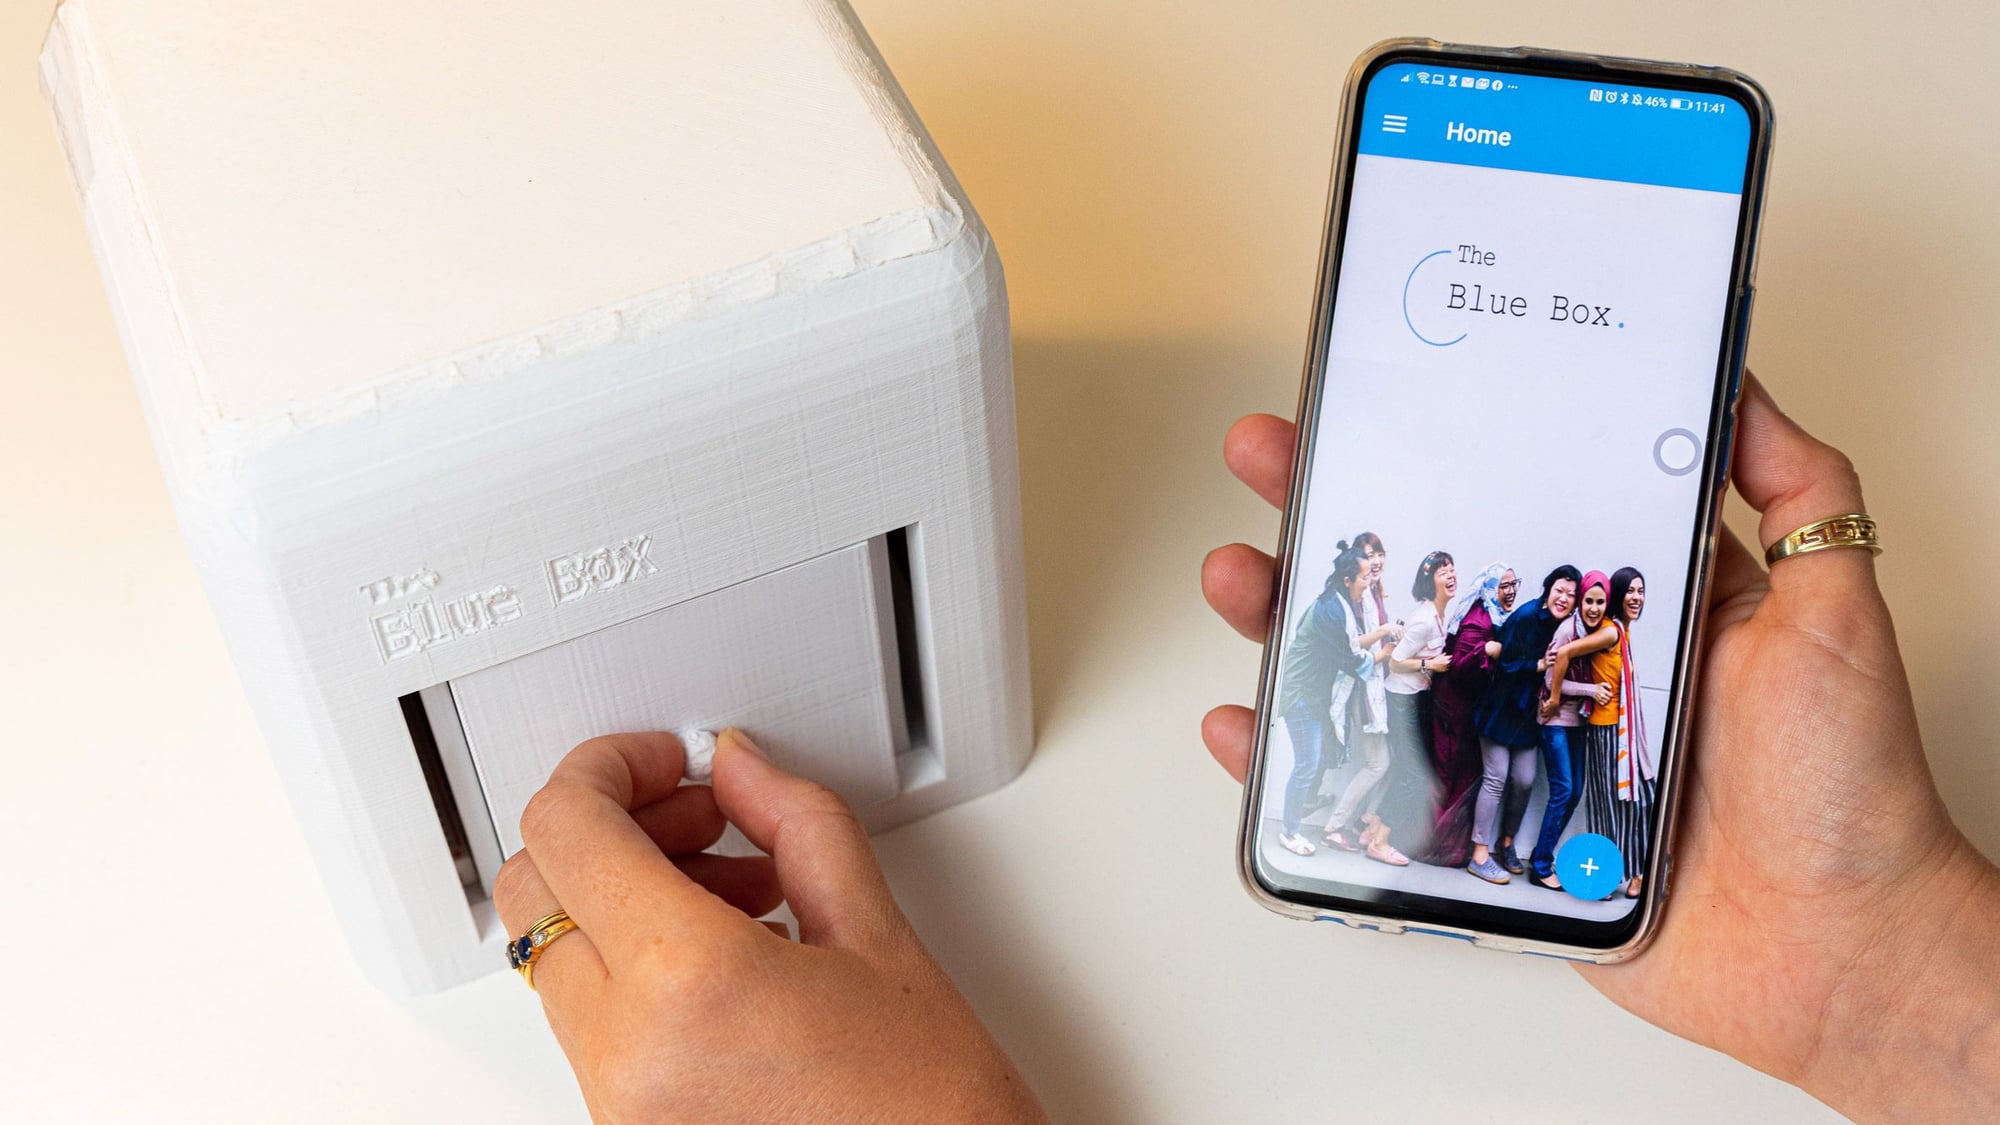 Judit Giró Benet's Breast-Cancer Detecting Blue Box transmits data directly to users' smartphones to give them fast, accurate at-home test results.